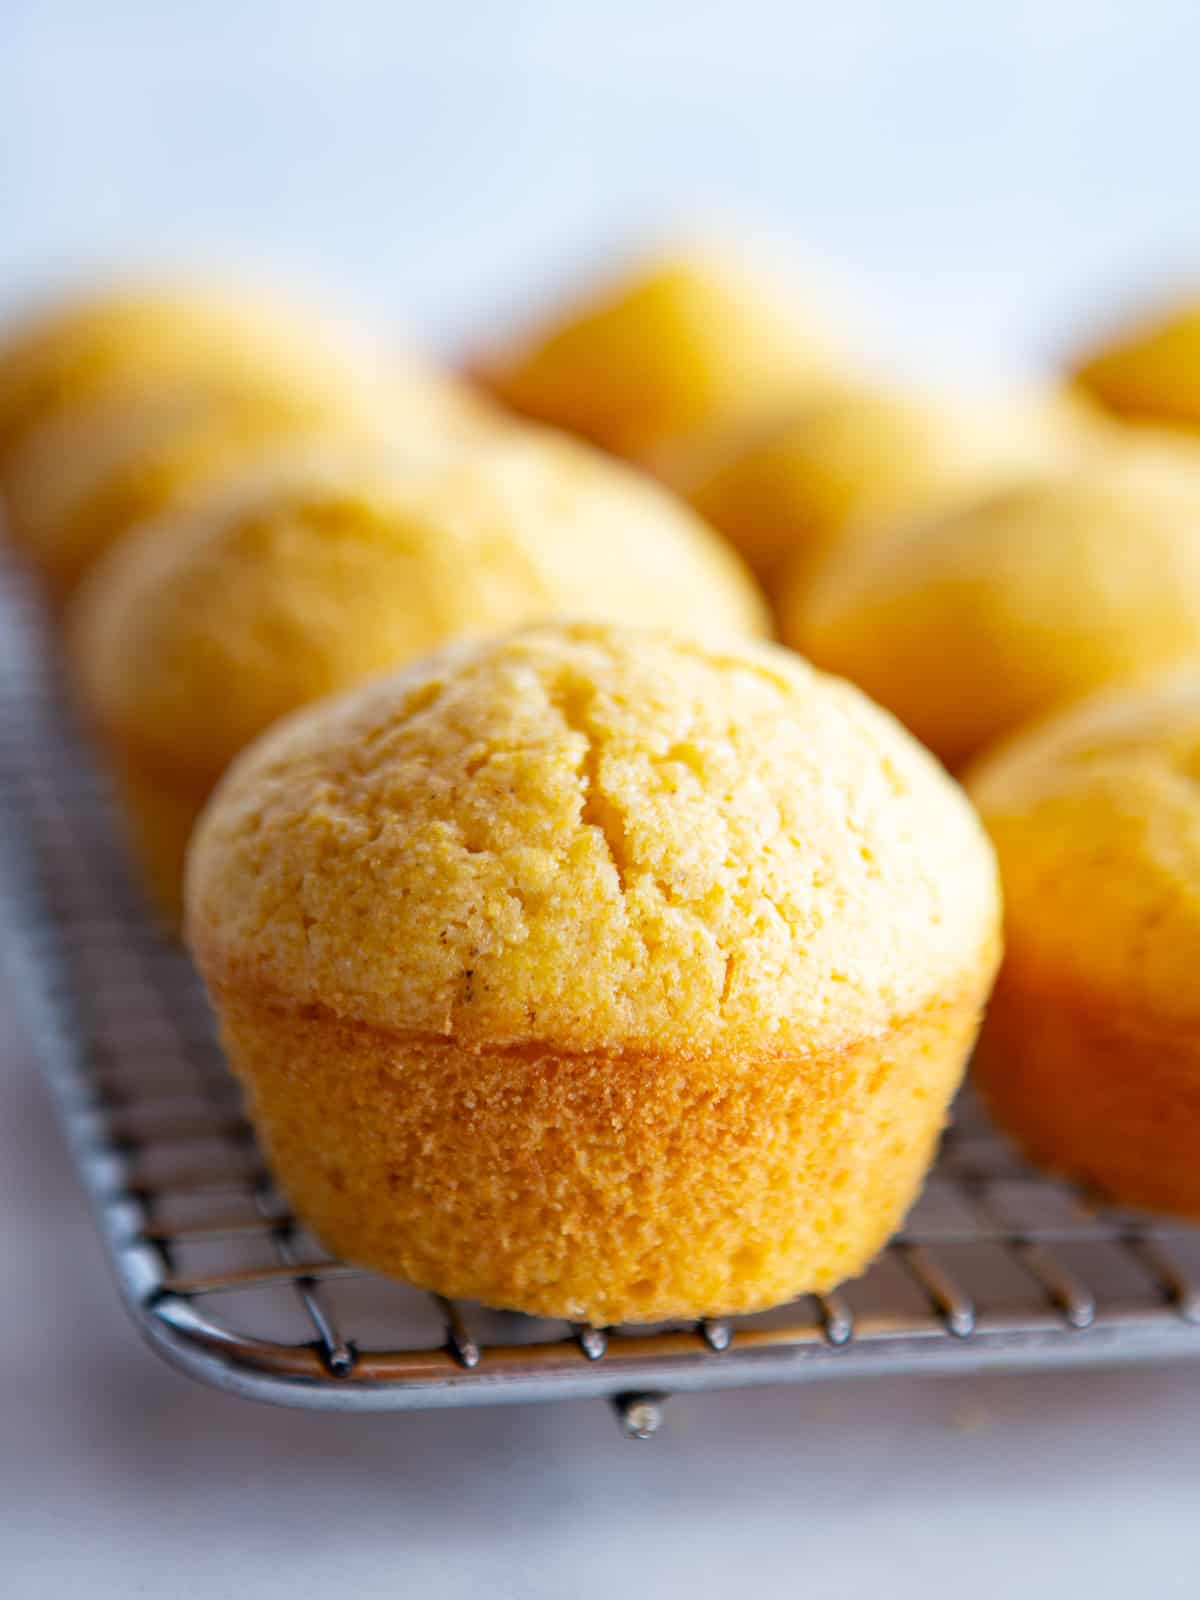 Gluten-free corn muffins cooling on a rack.